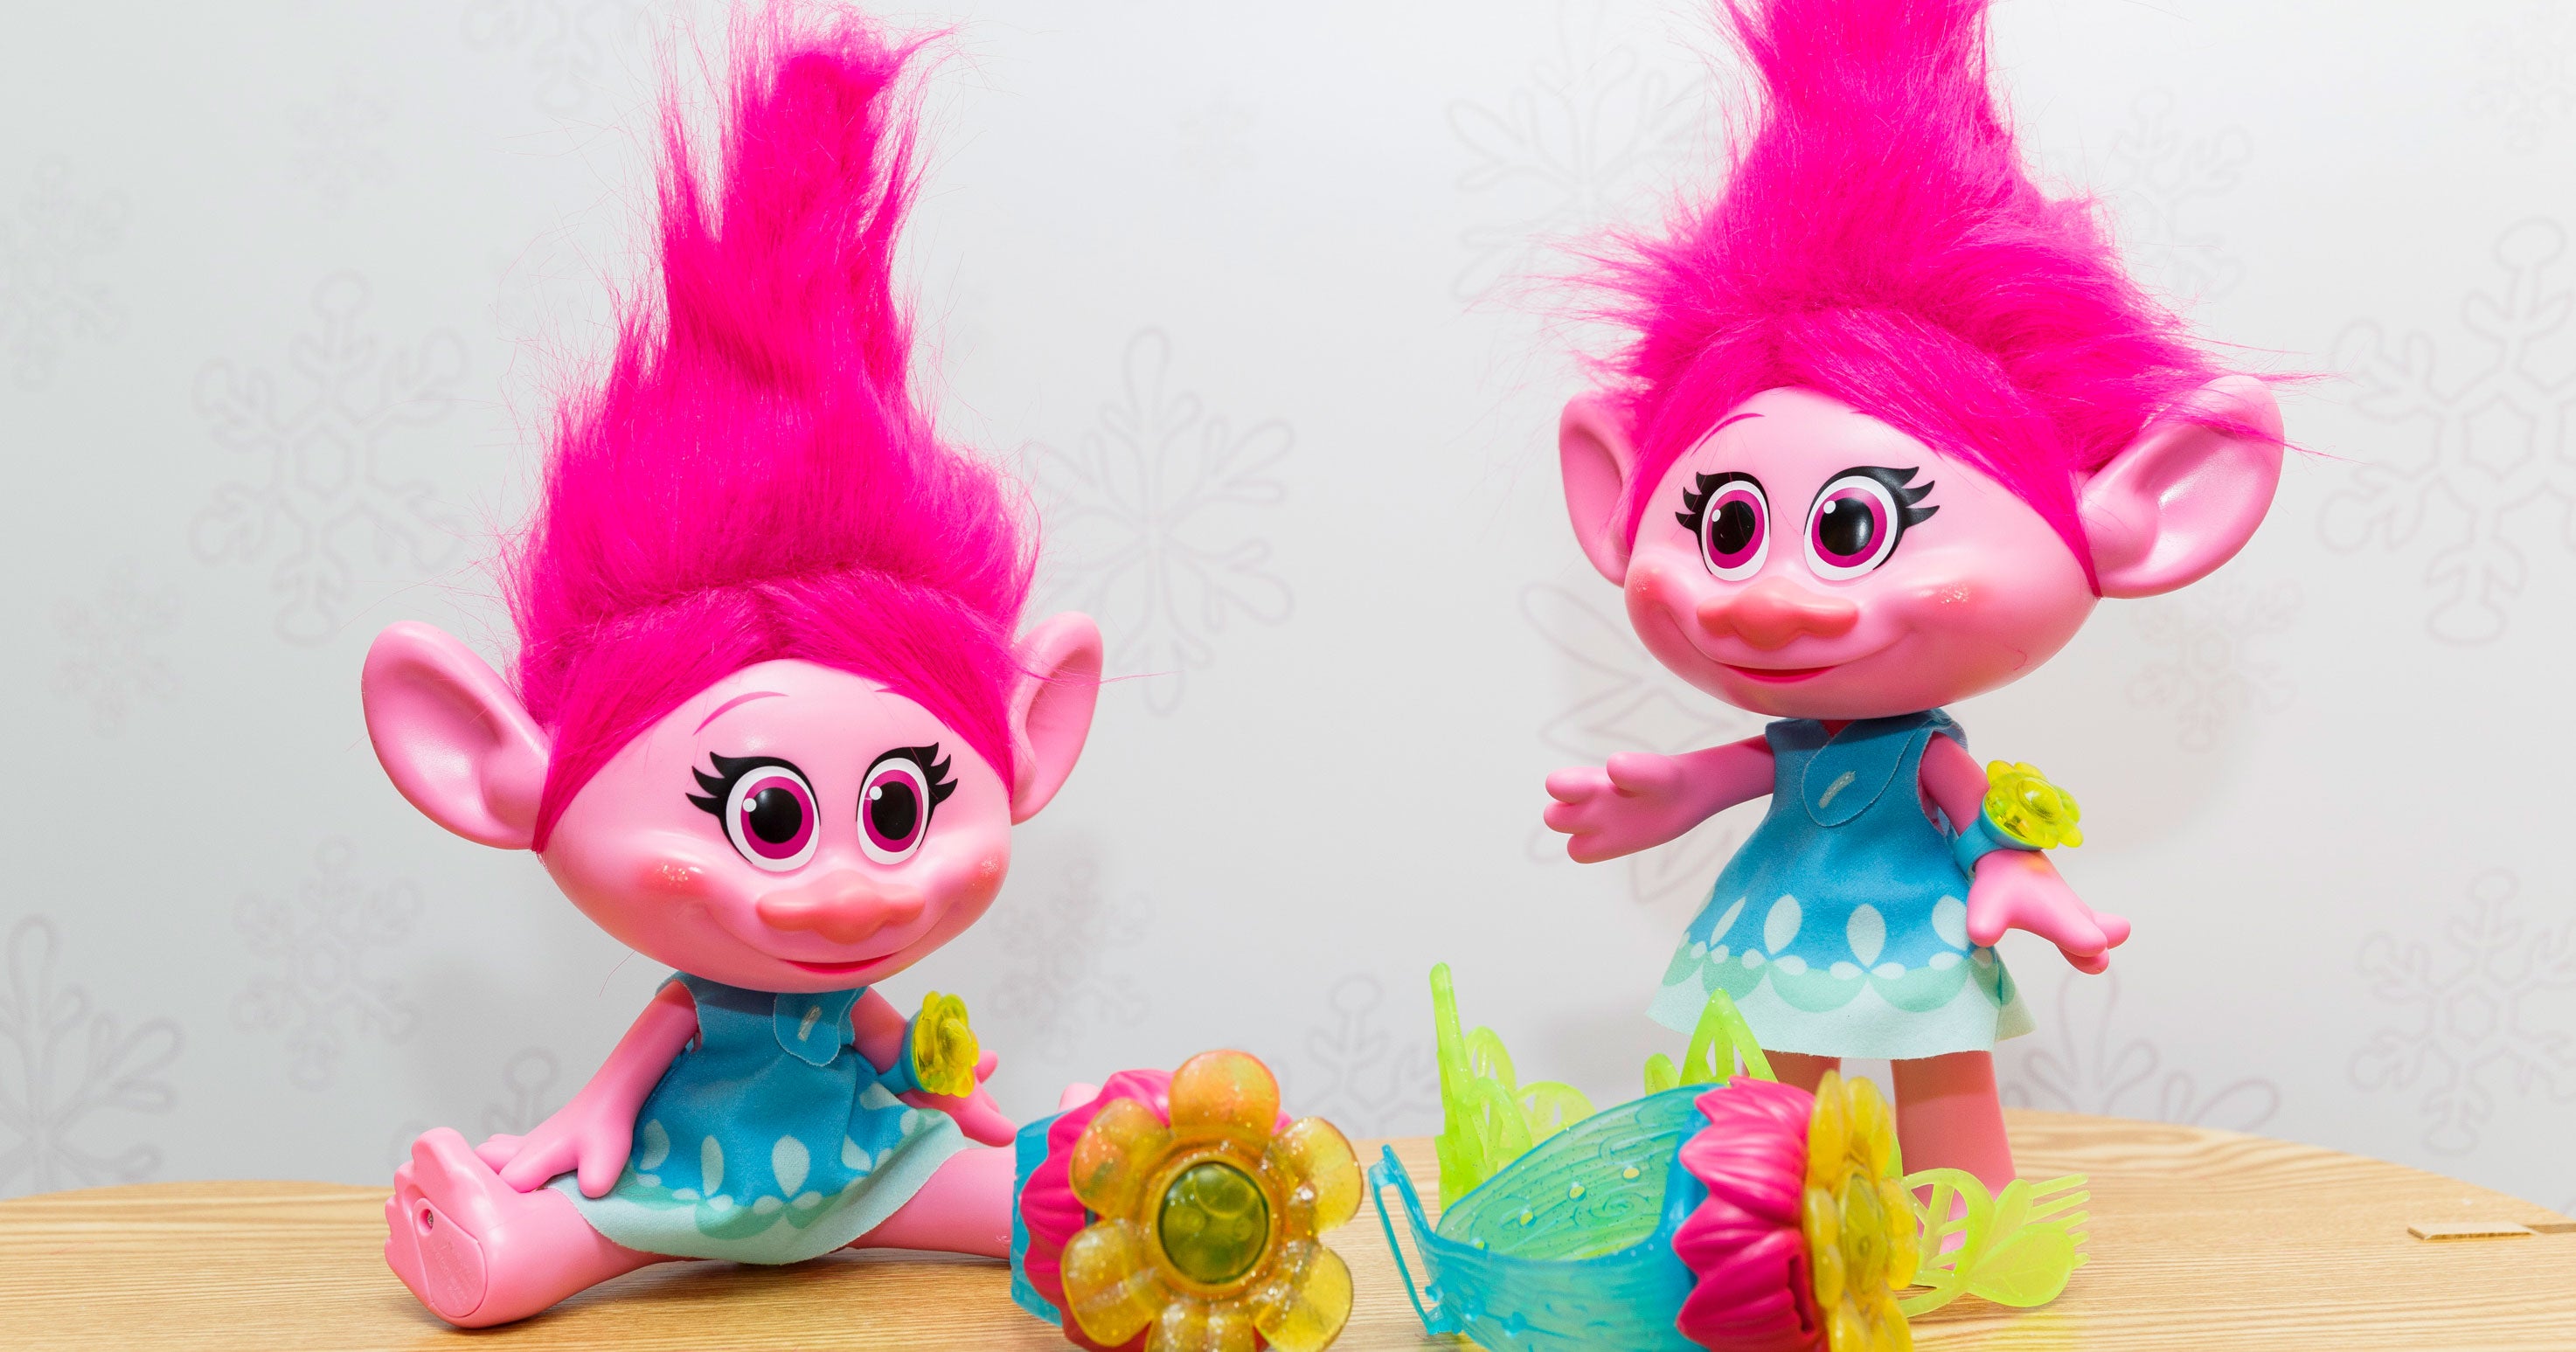 Why Trolls Poppy Doll Is Causing So Much Controversy